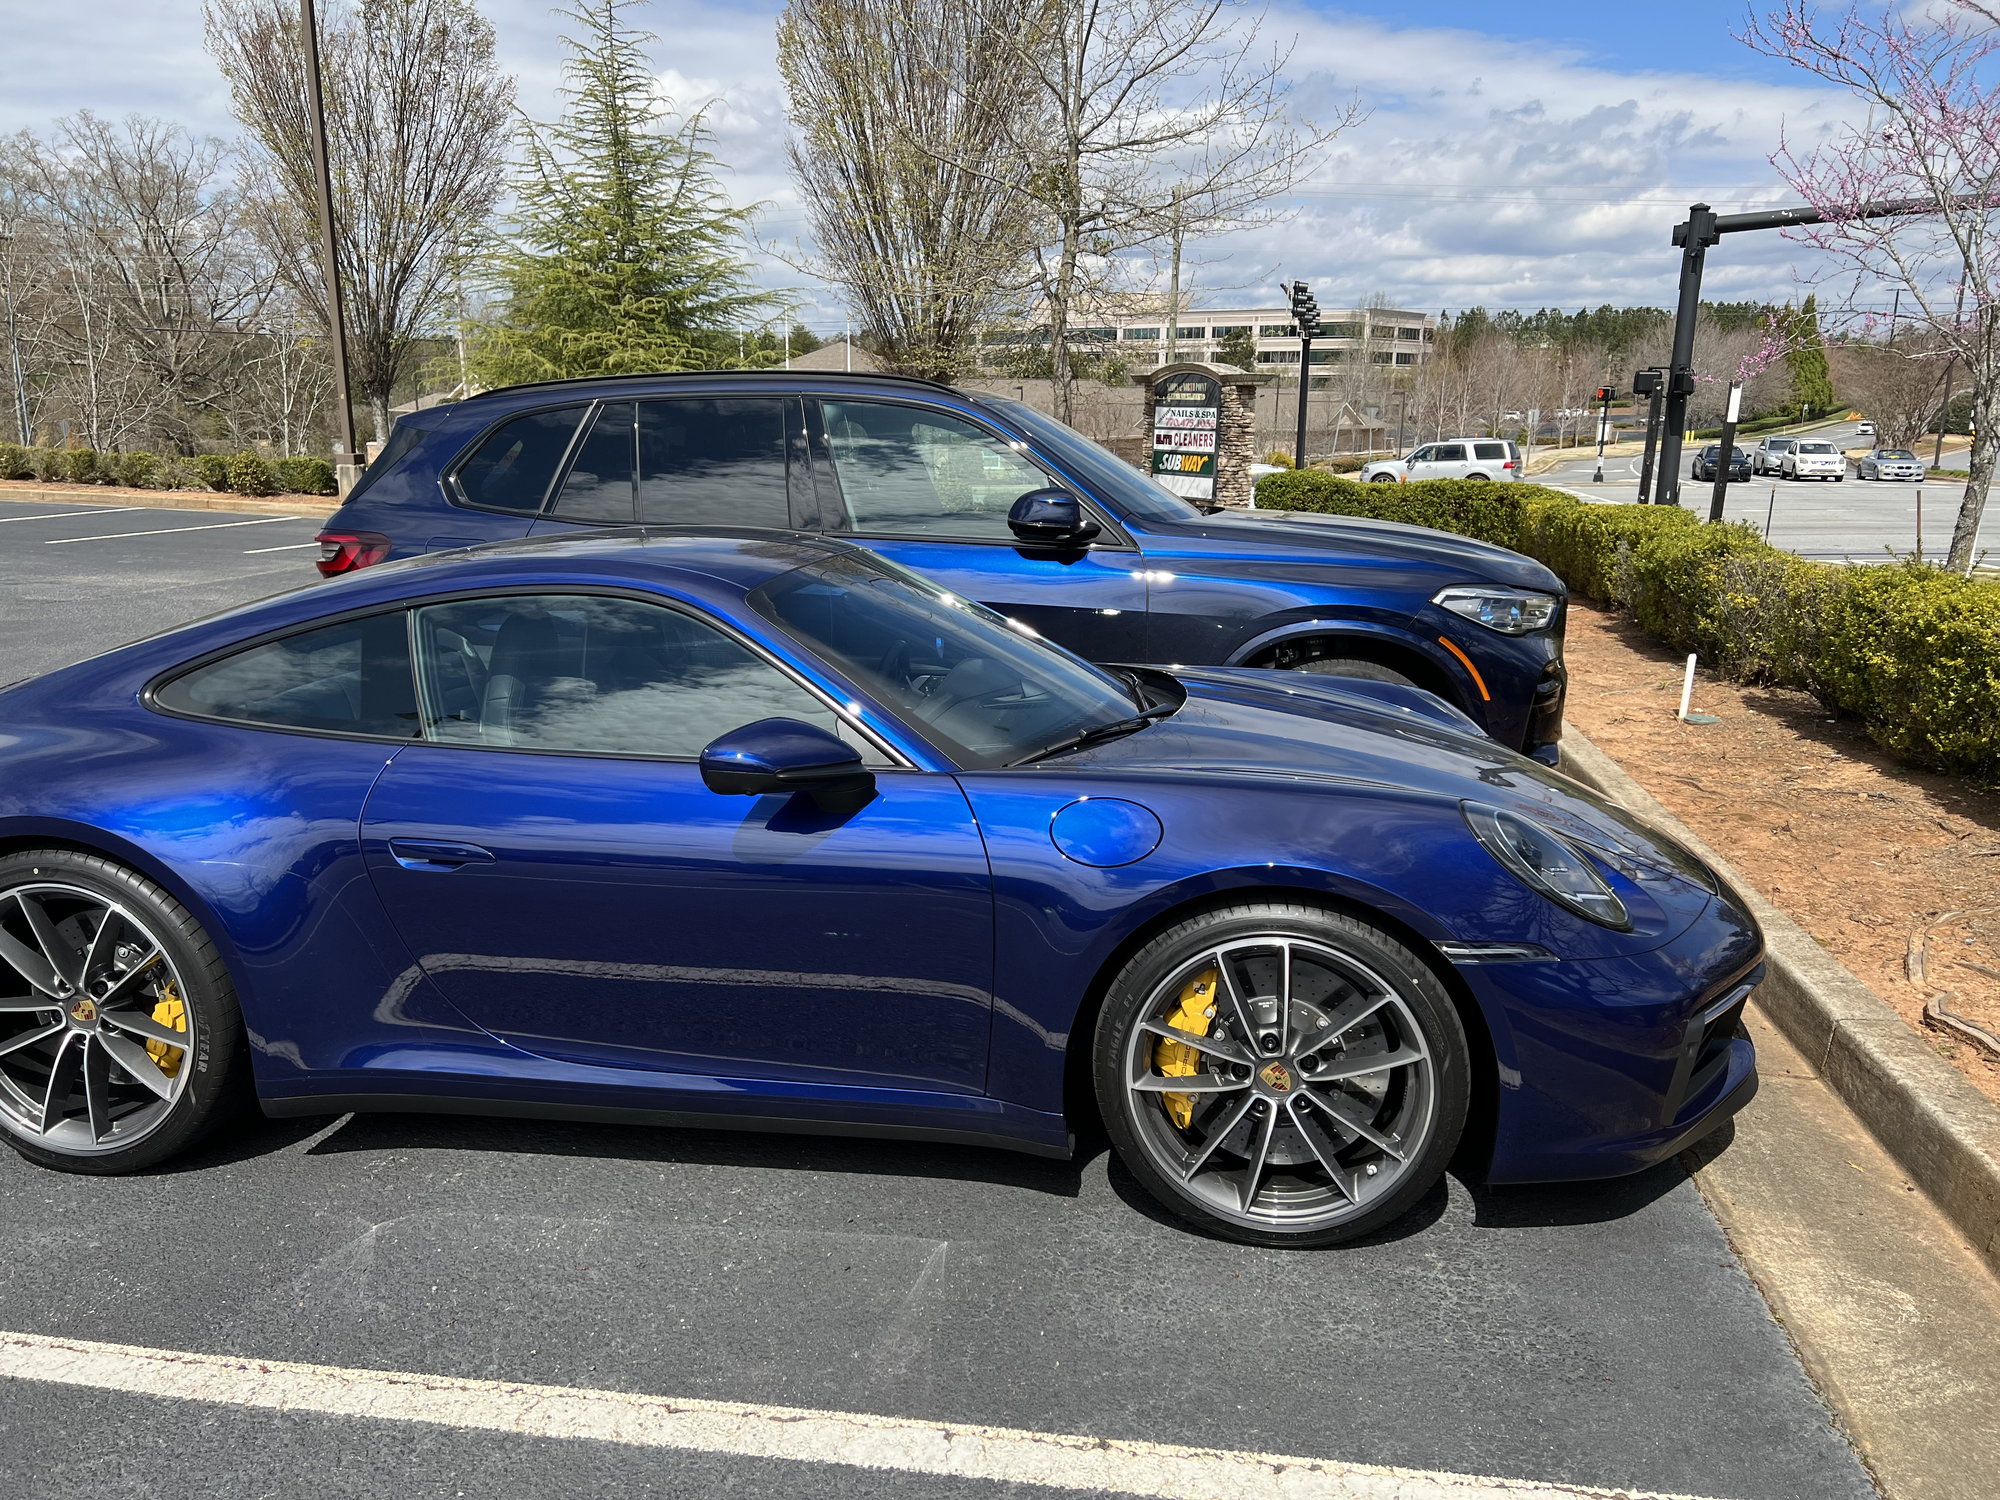 Gentian Blue or Ice Grey  TaycanForum -- Porsche Taycan Owners, News,  Discussions, Forums